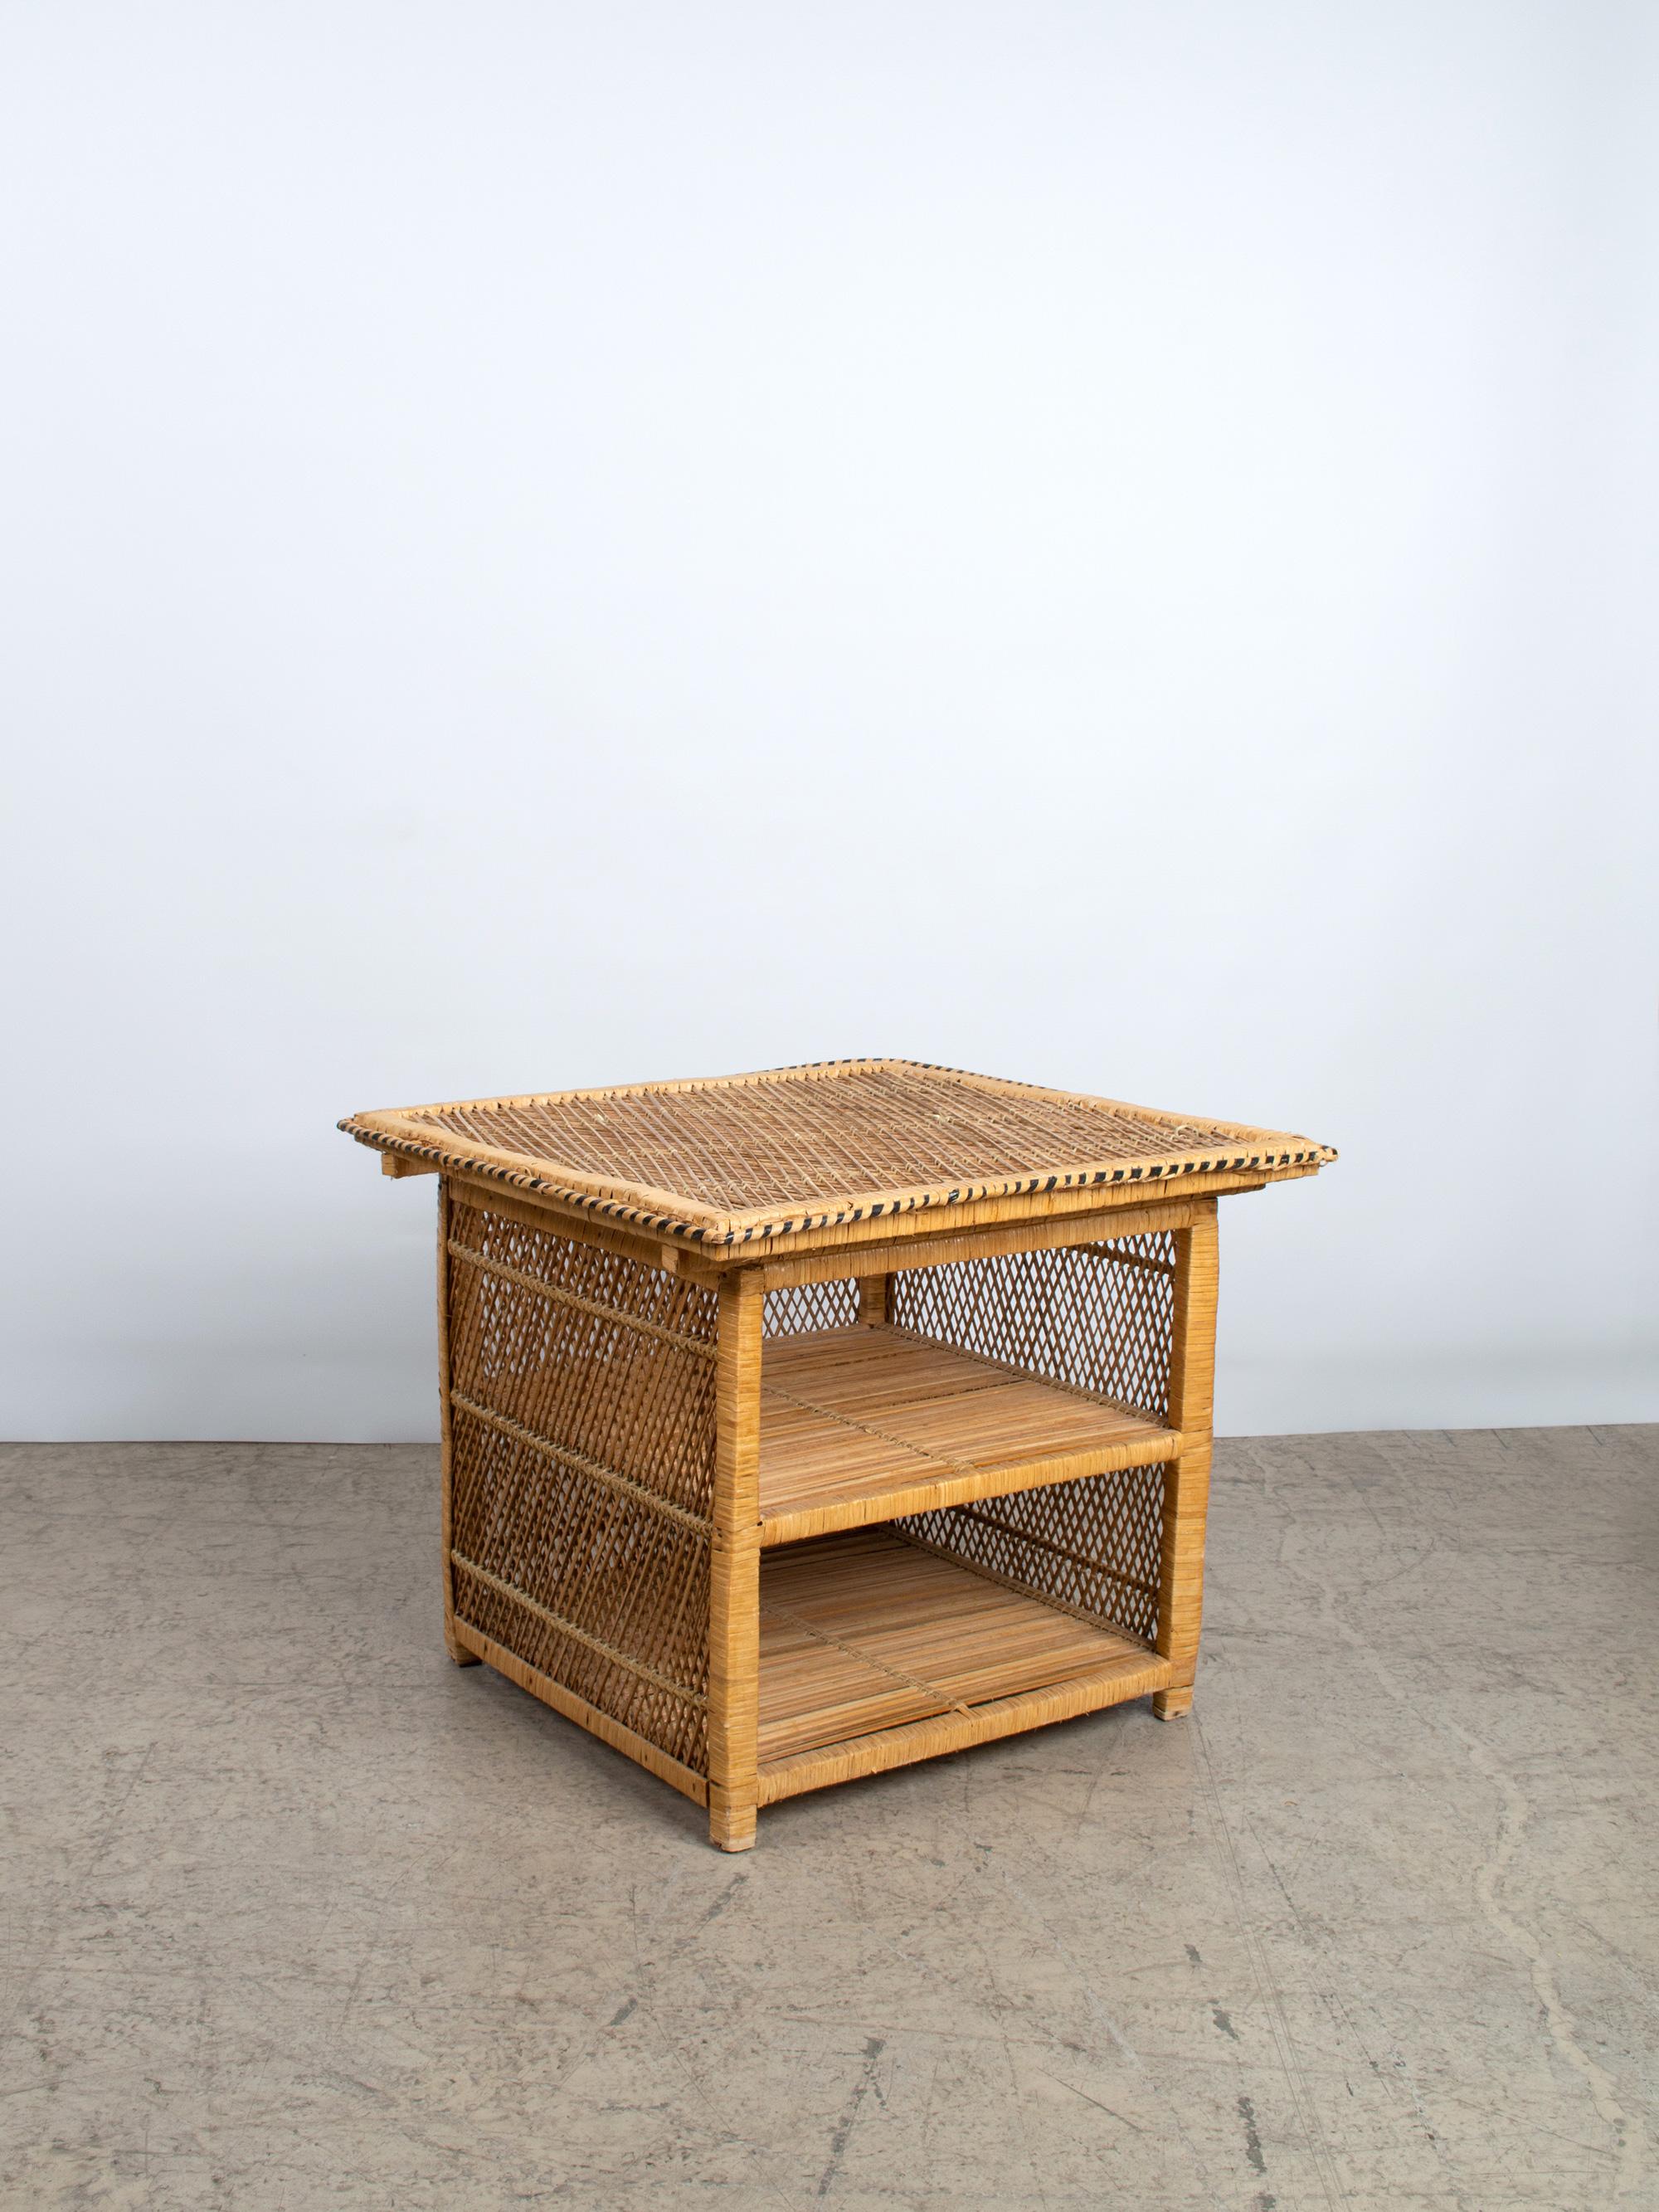 Coffee table handcrafted in rattan in the manner of the Emmanuelle chair.
Excellent condition commensurate of age.